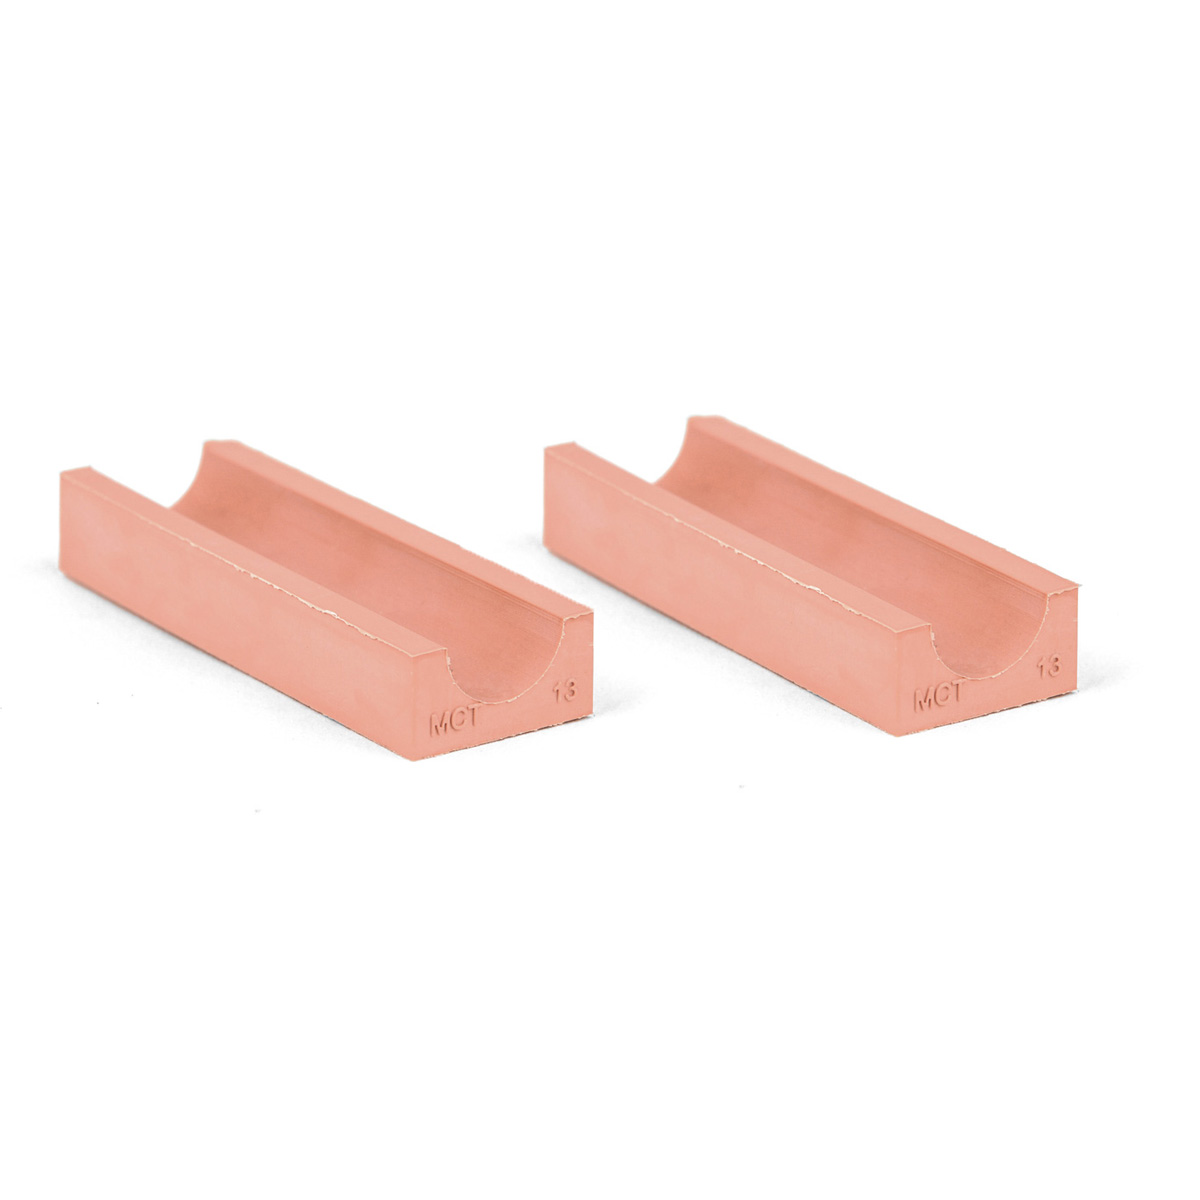 20-13*2 Set of 2 half insert block lycron 30mm, 20-13 for cable/pipe diam. 12.5-13.5mm